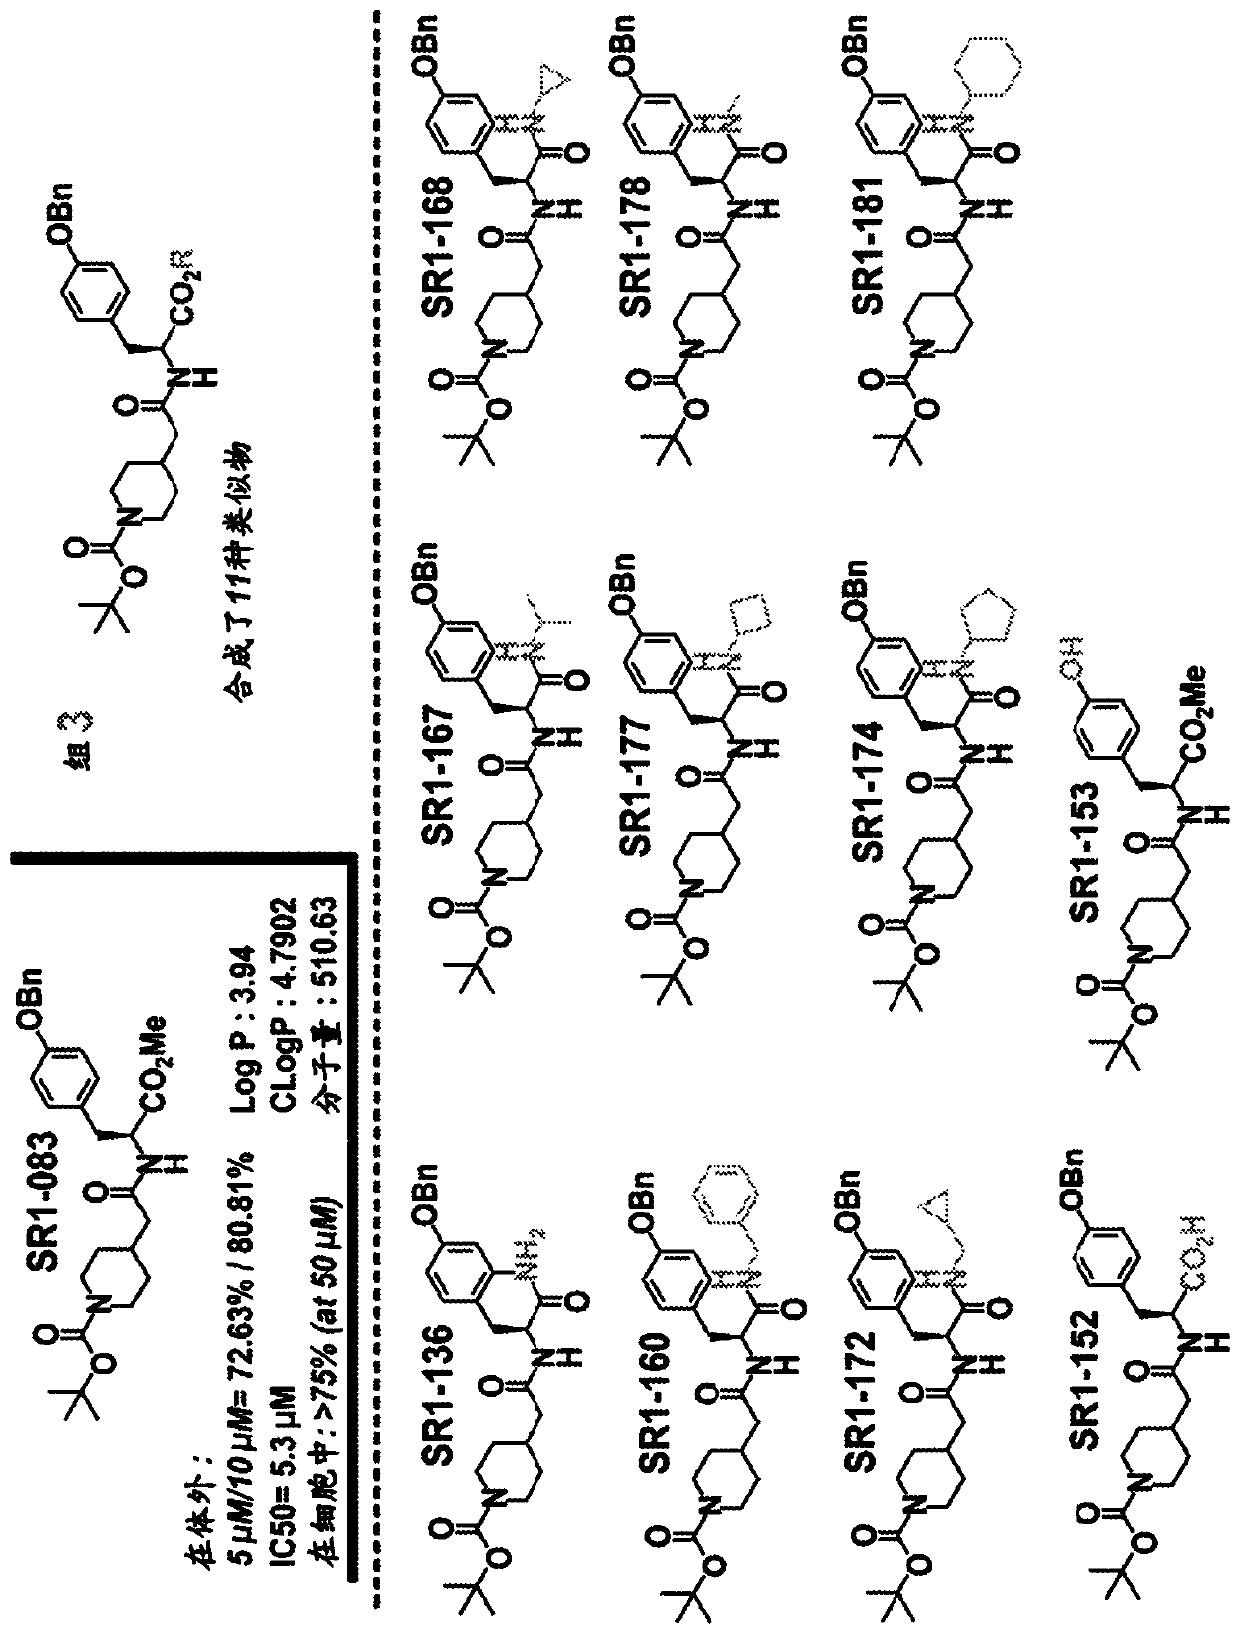 Yap1 inhibitors that target the interaction of yap1 with oct4